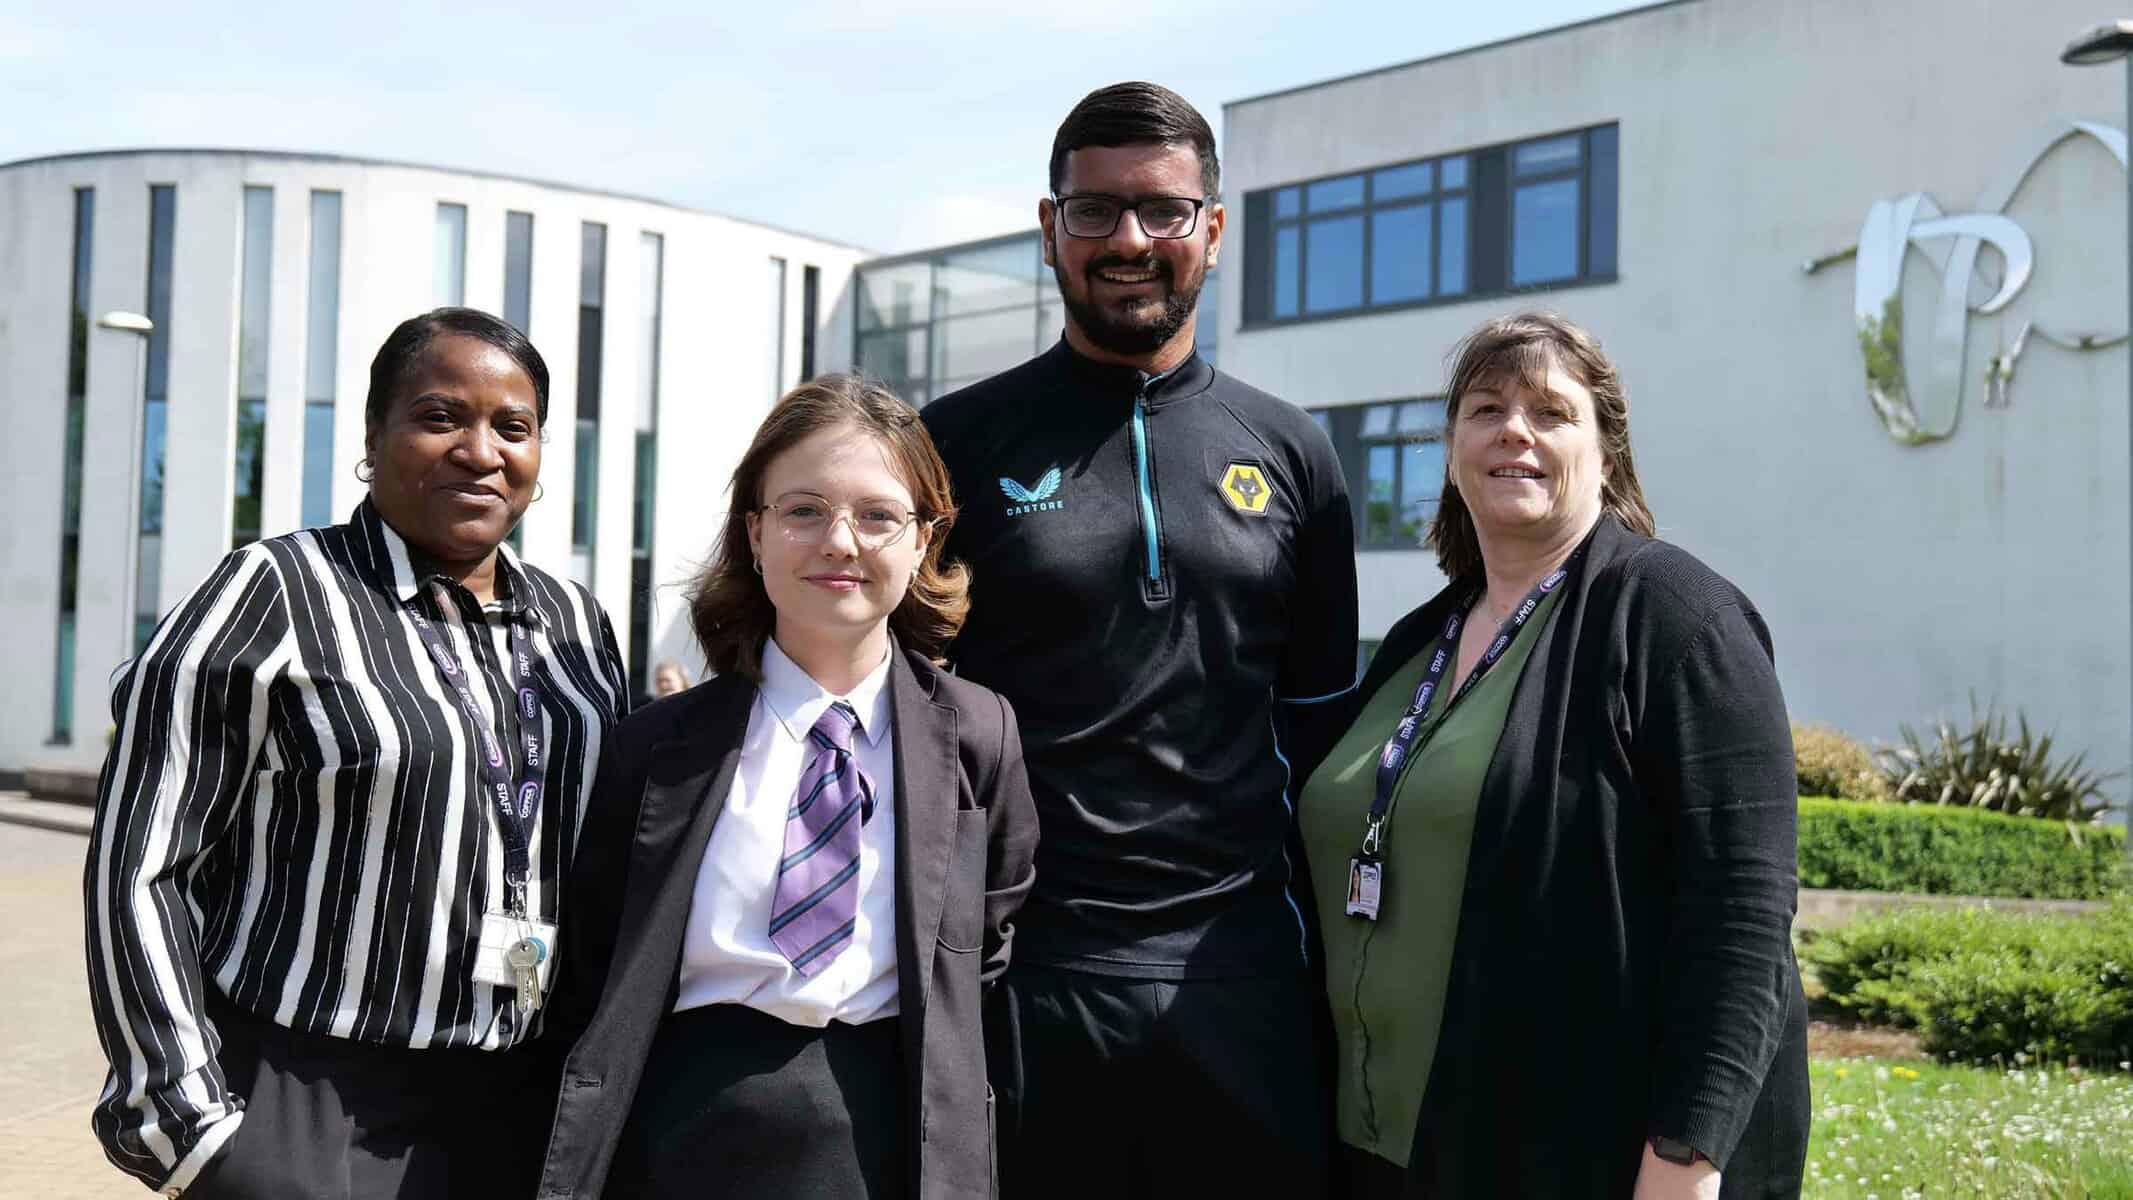 Maisey’s Story: Reconnecting and building confidence through Premier League Inspires Image